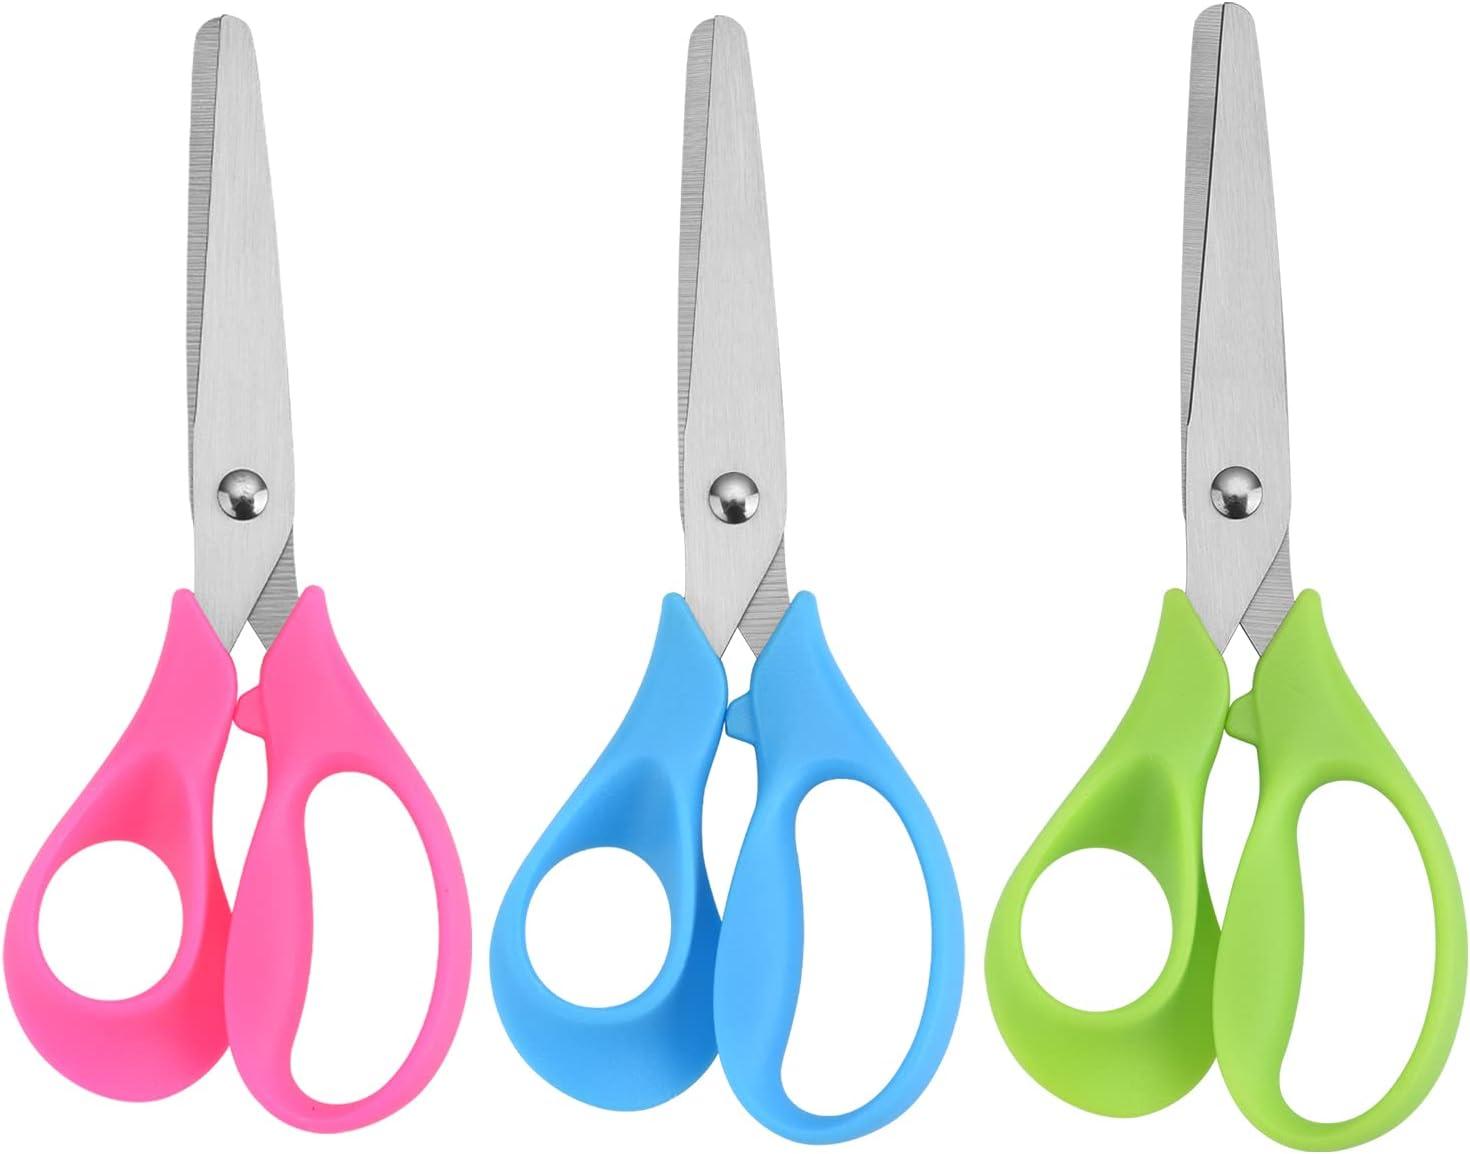 LIVINGO 3 Pack 5” Kids Scissors, Left/Right Handed Blunt Stainless Safety  Toddler Preschool Child Scissors with Cover, School Classroom Craft  Supplies